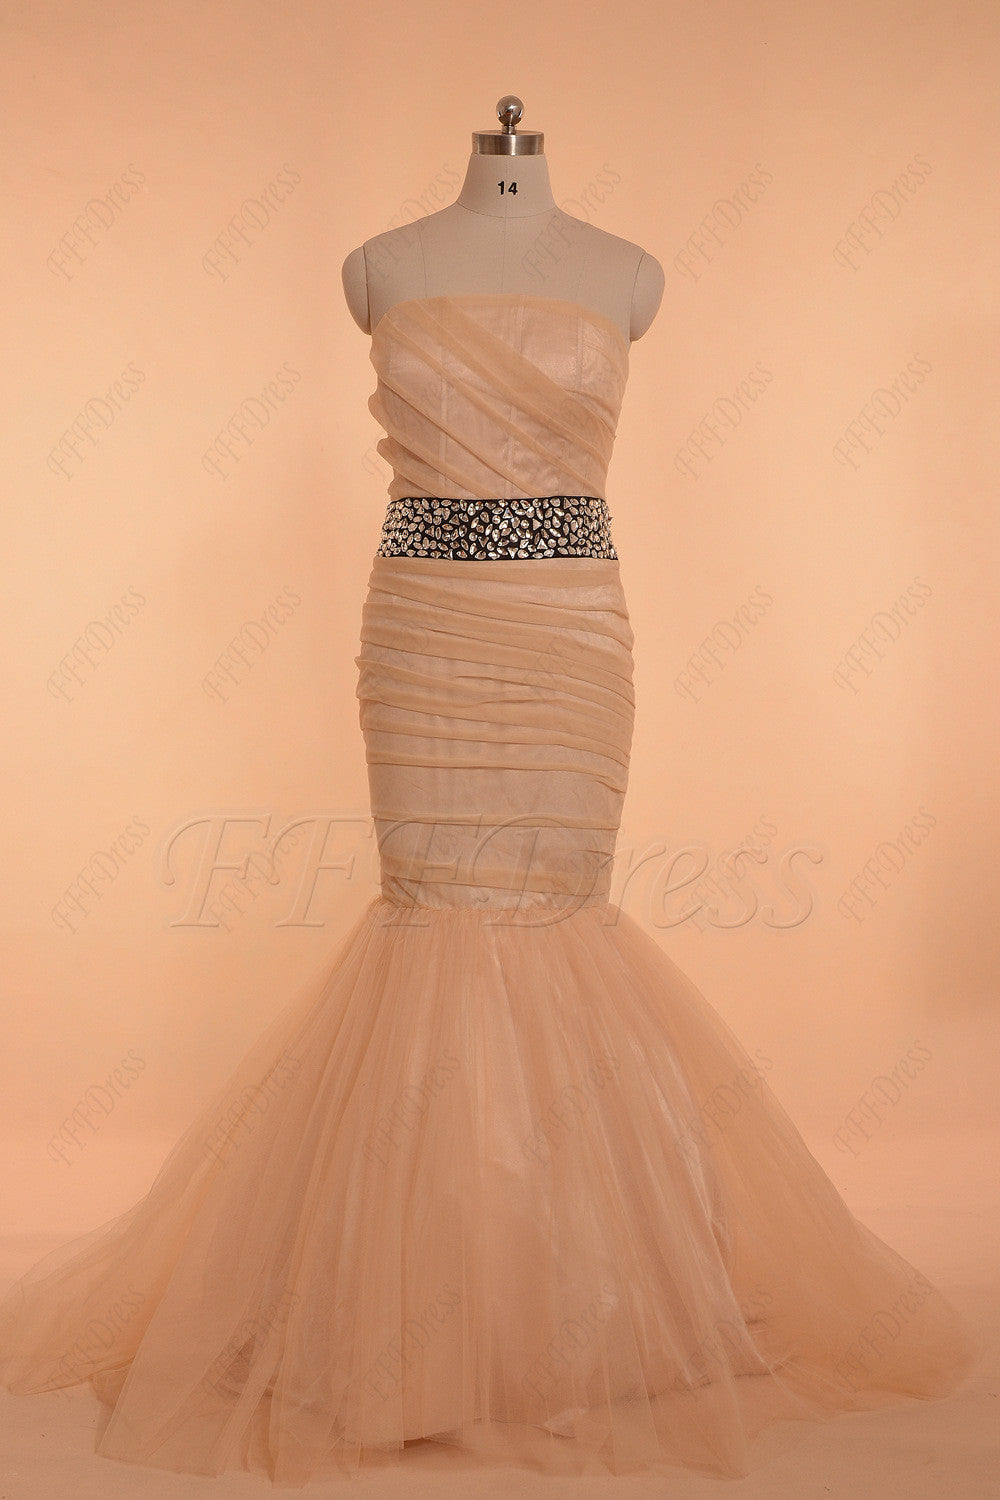 Mermaid champagne prom dresses with crystal sparkly waist